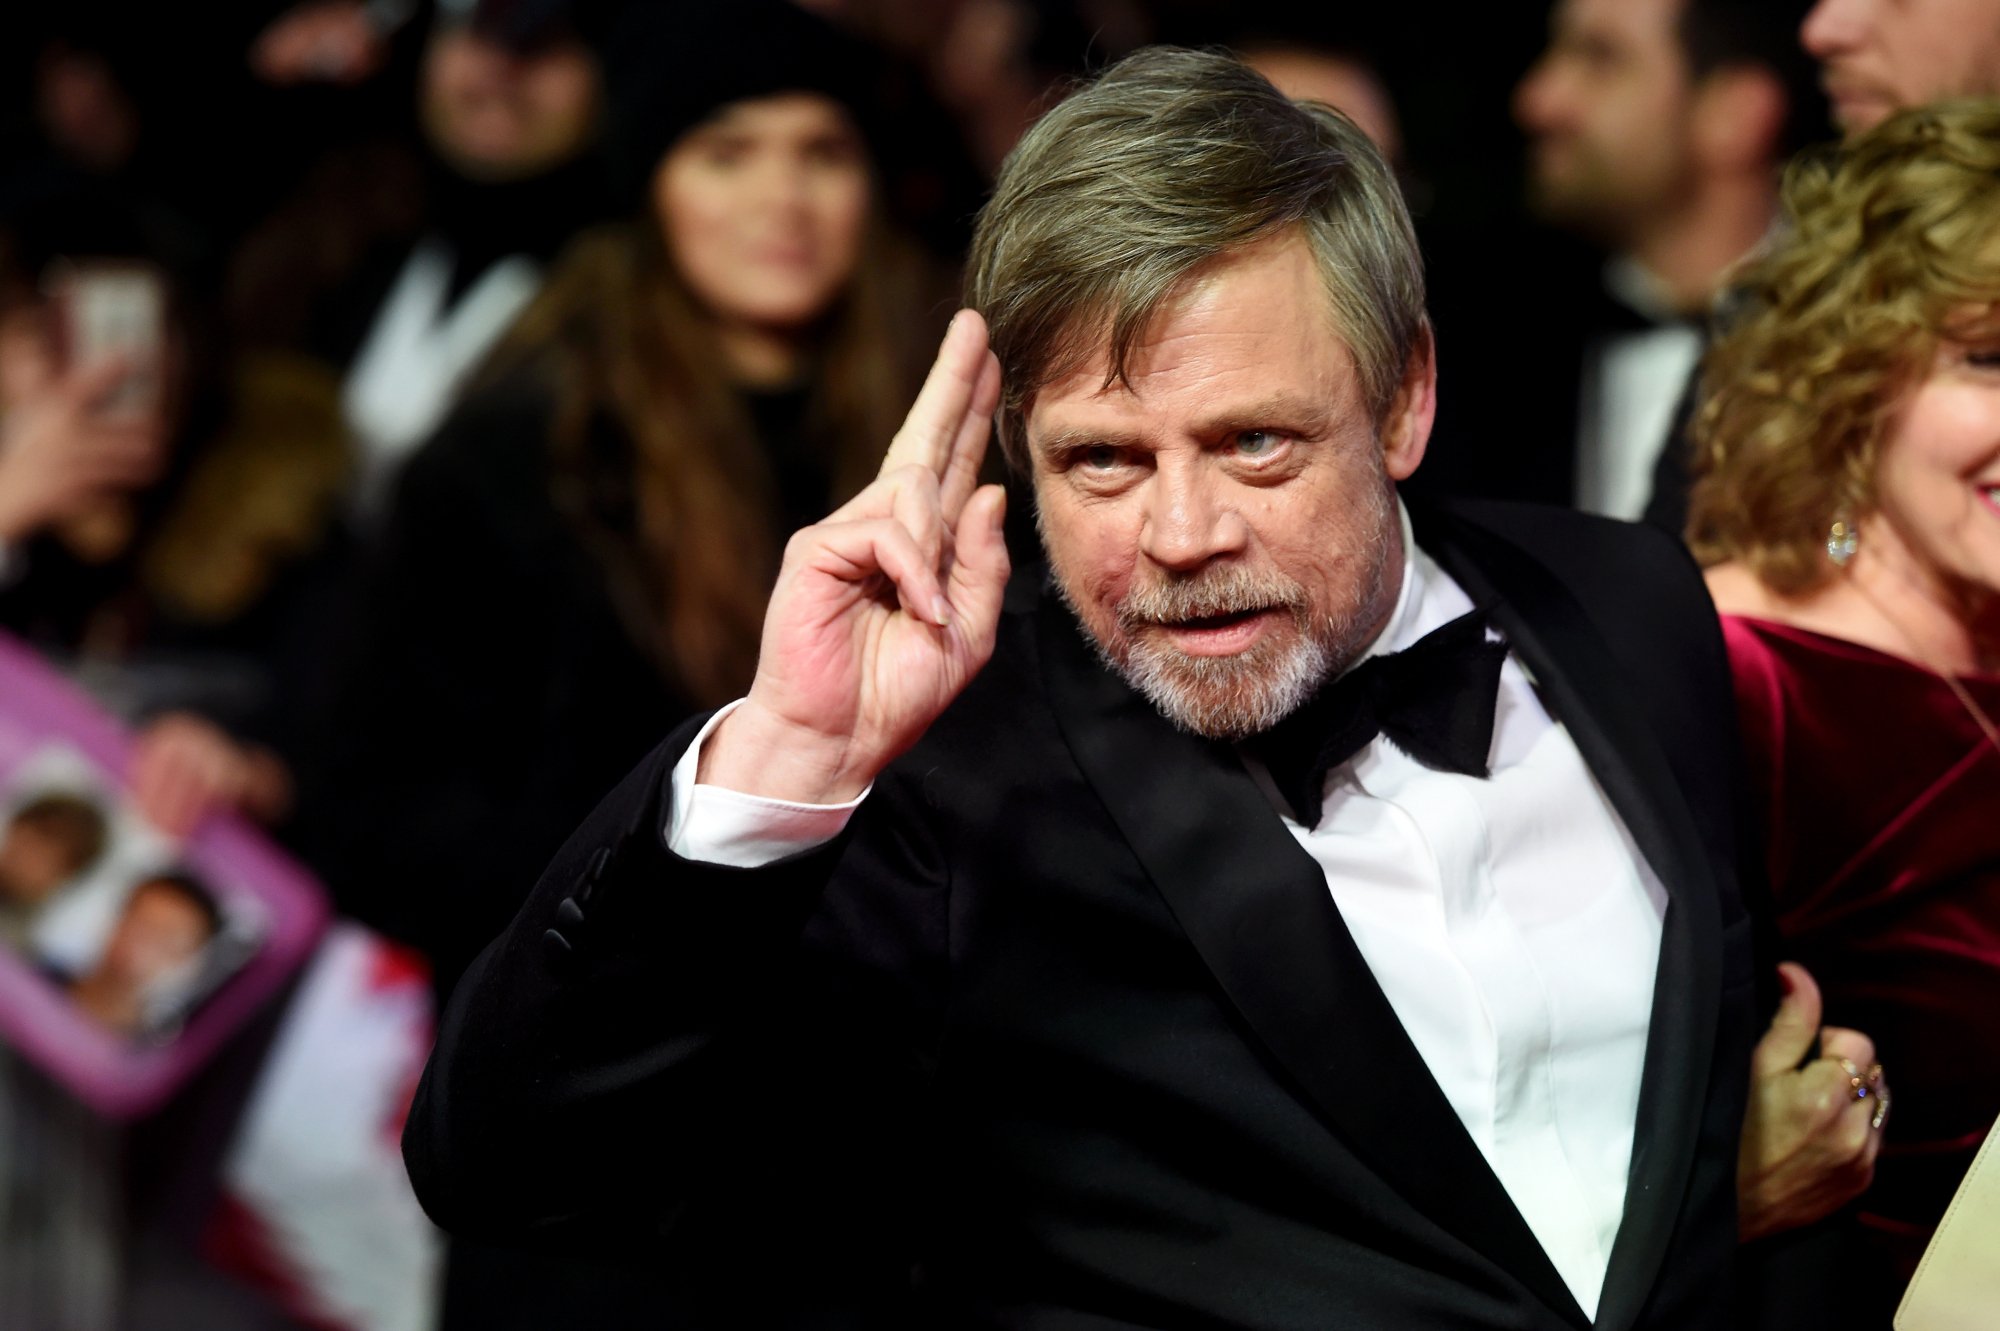 'Star Wars' actor Mark Hamill wearing a tux saluting with two of his fingers